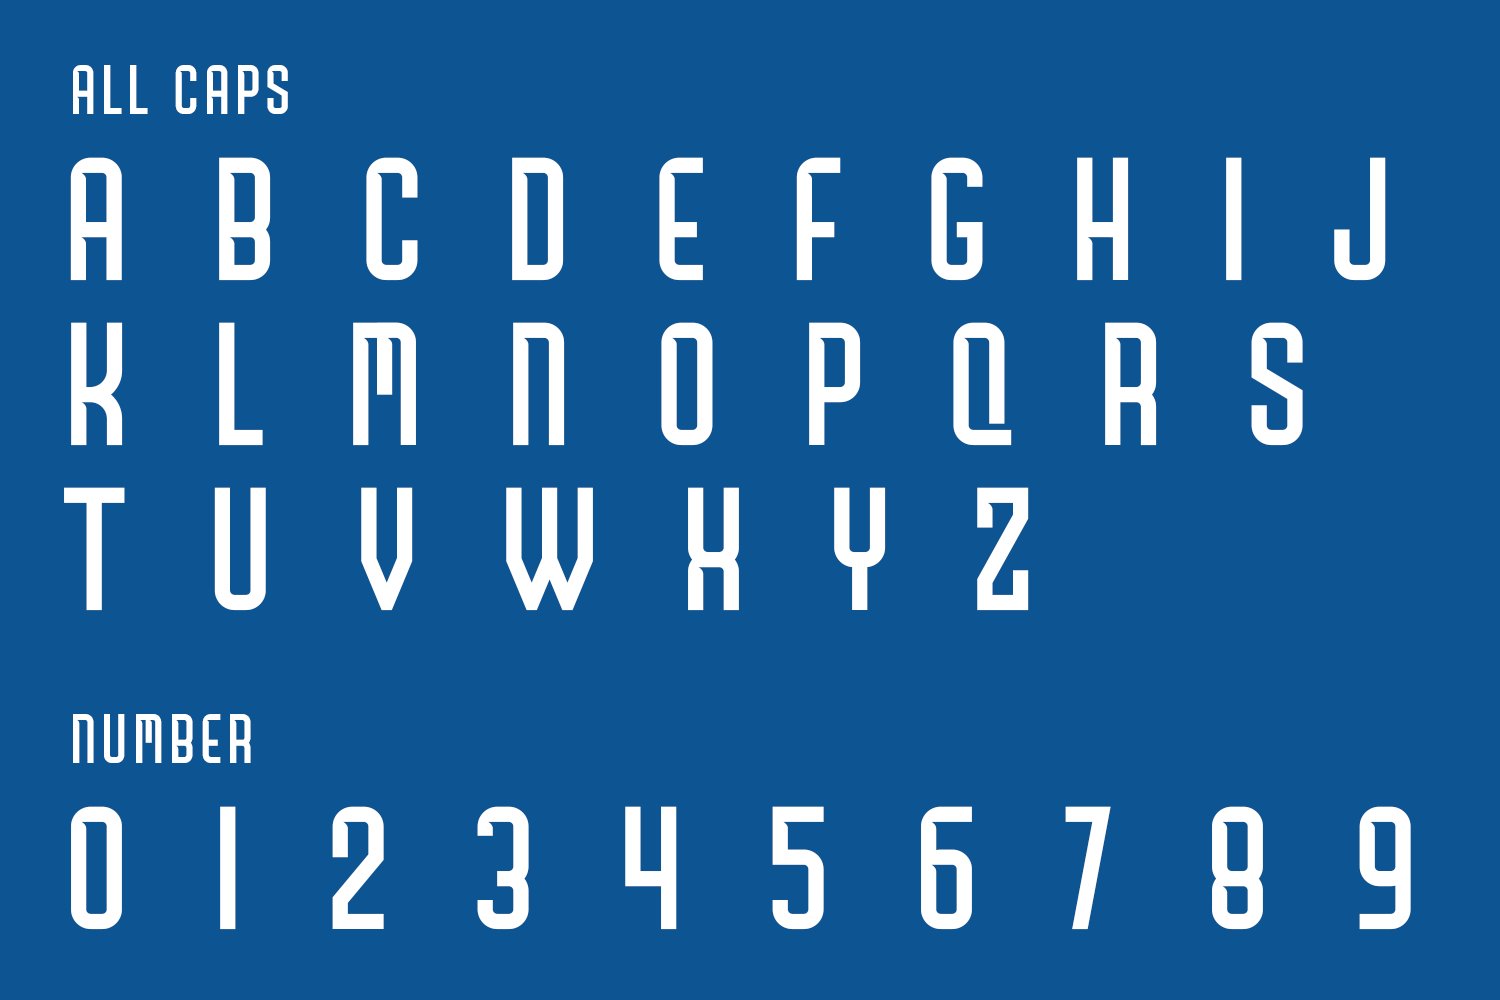 A set of white letters and numbers on a blue background.